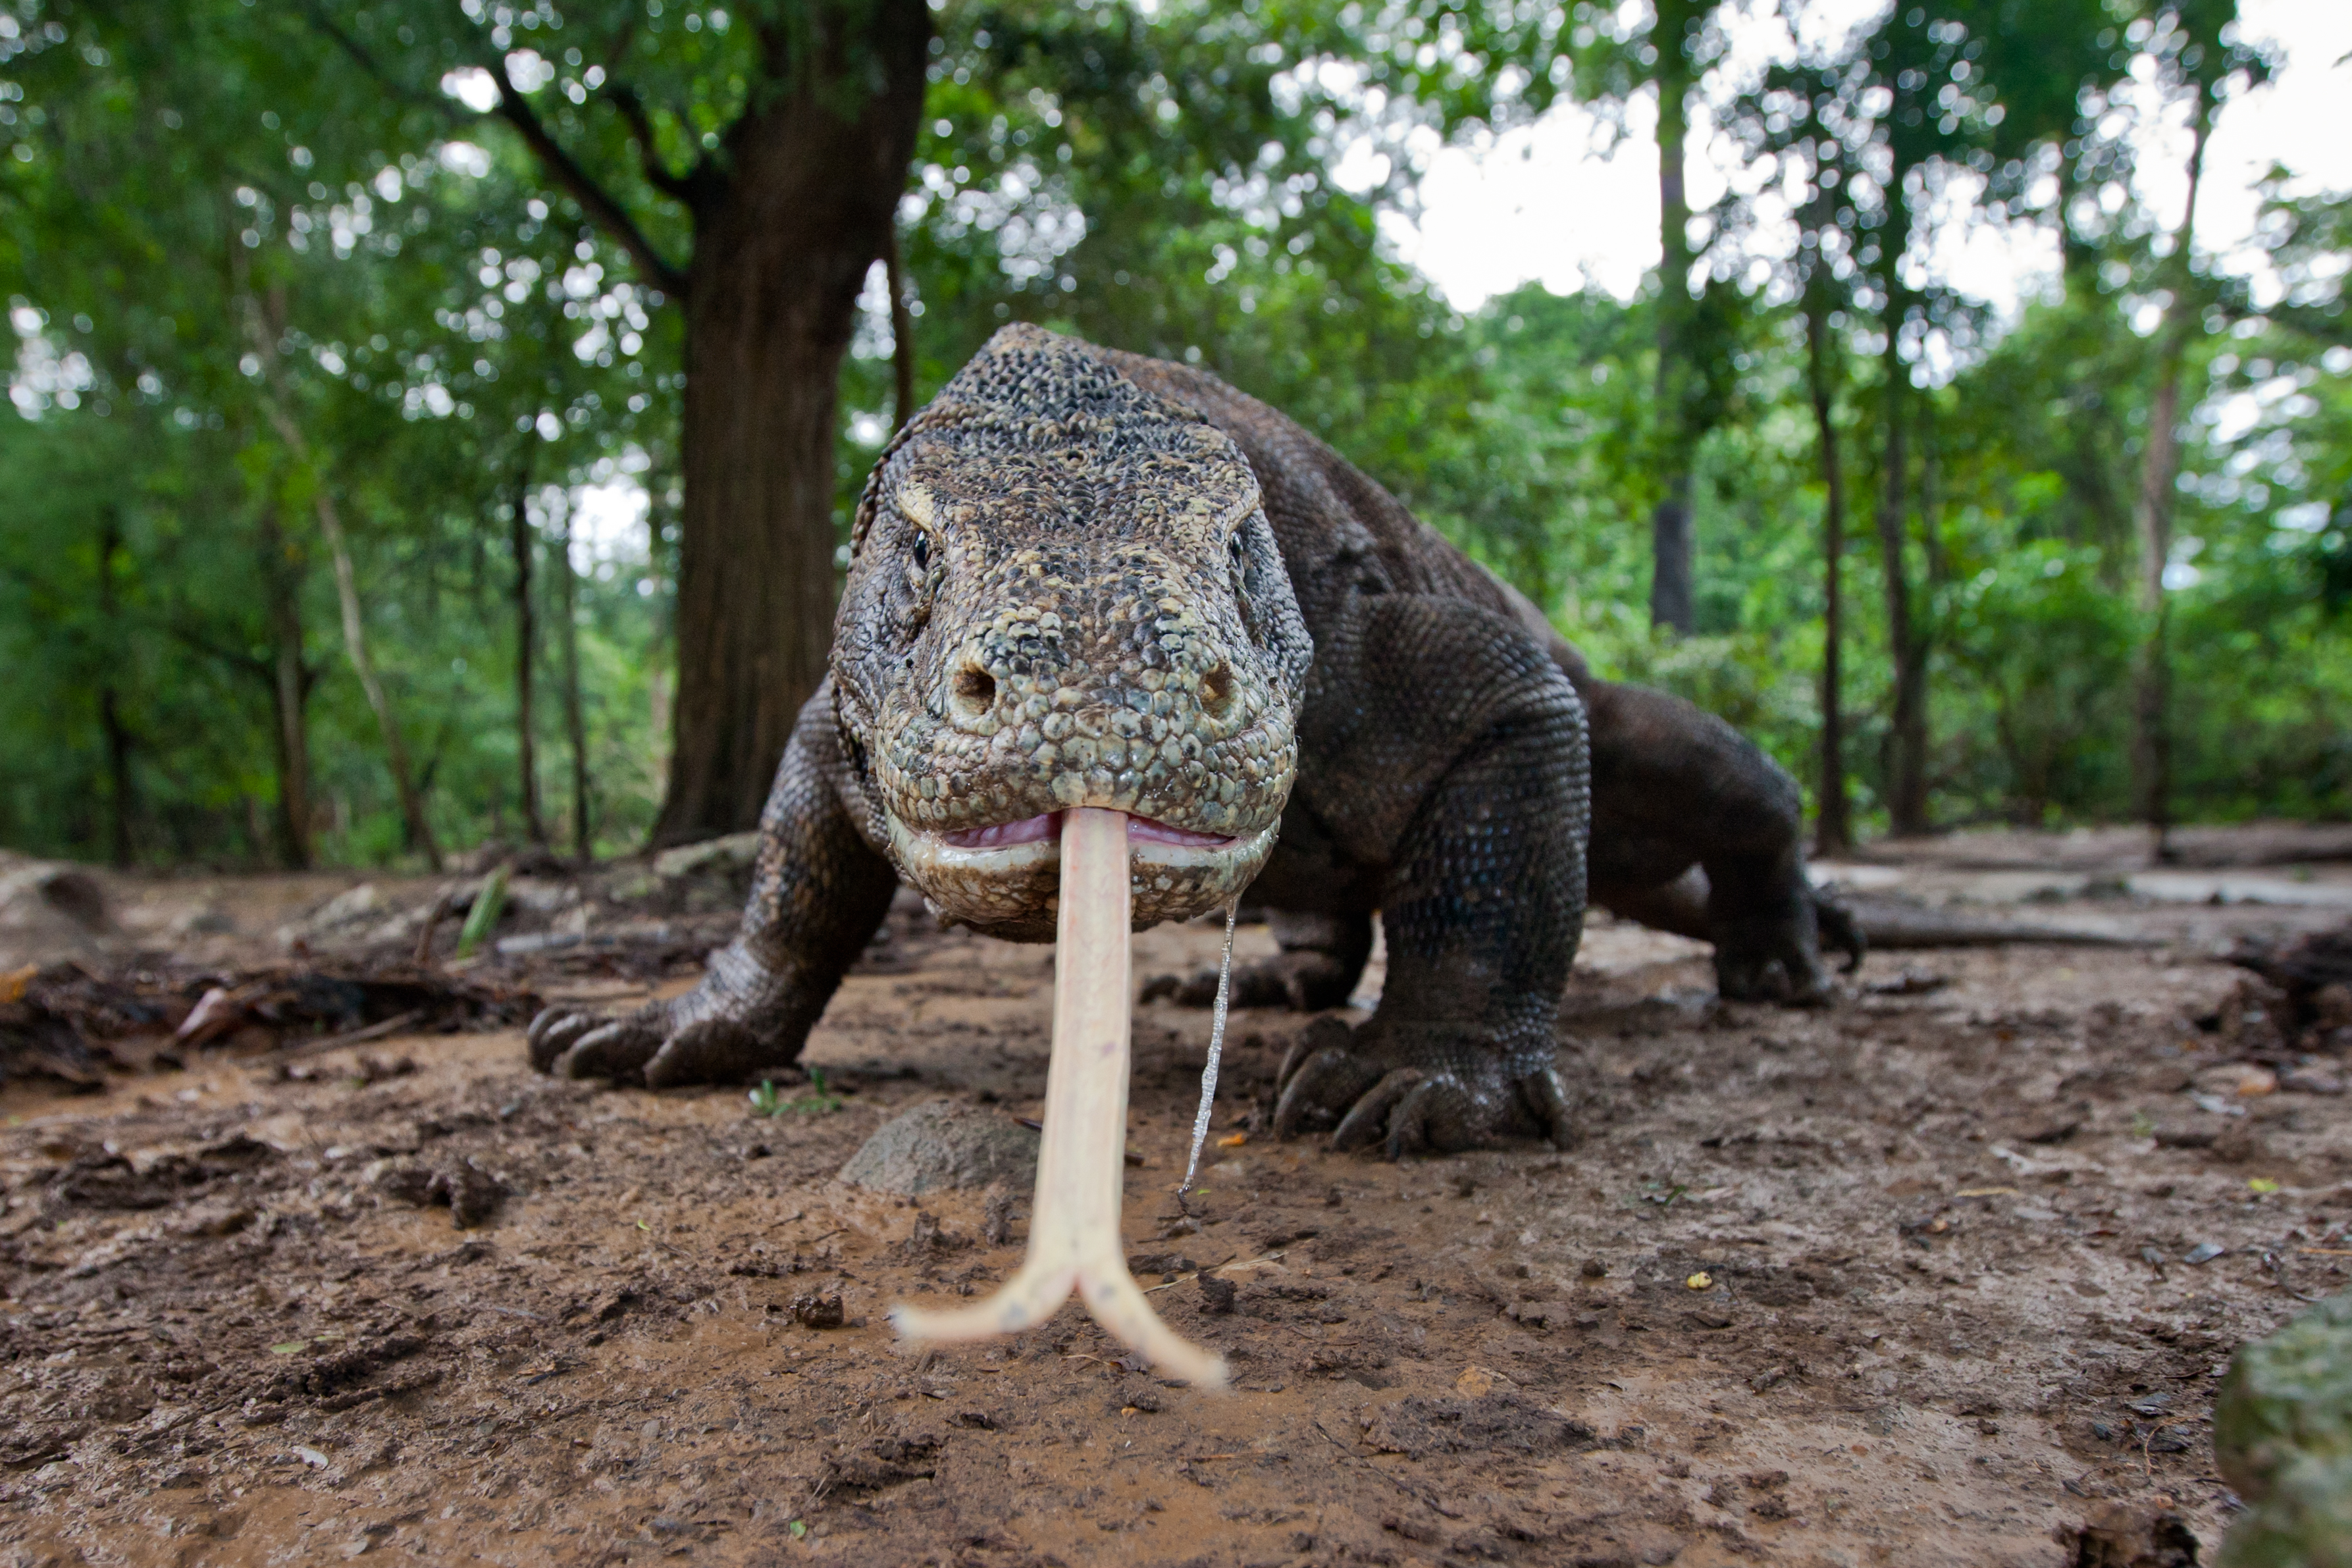 A Komodo dragon investigates the camera with its long forked tongue.